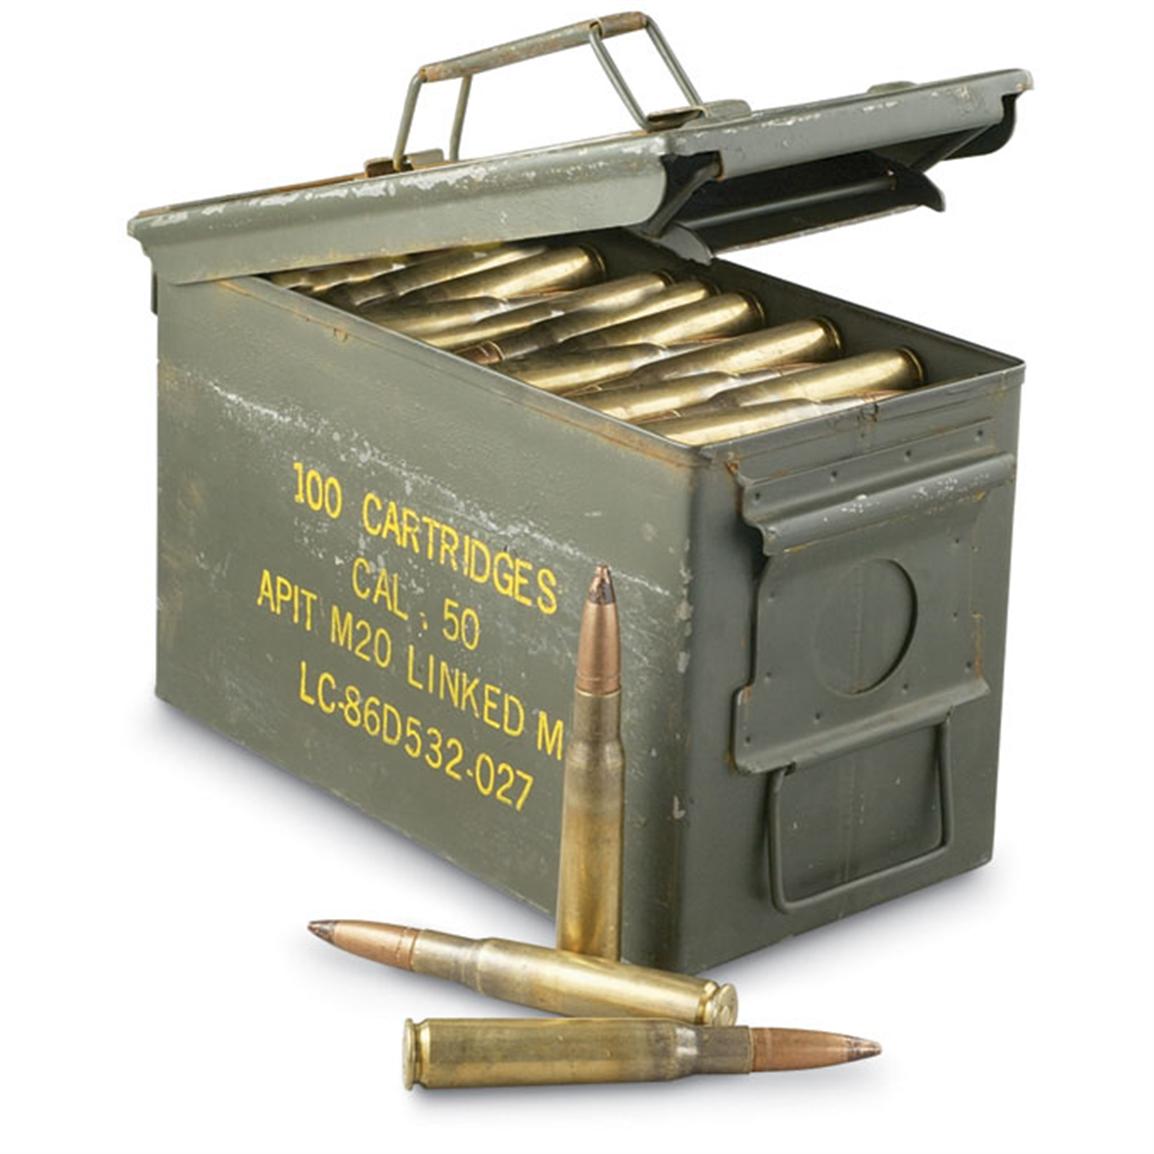 150 Rds Of 50 Cal Tracer Ammo In Ammo Can 79770 At Sportsmans Guide ...